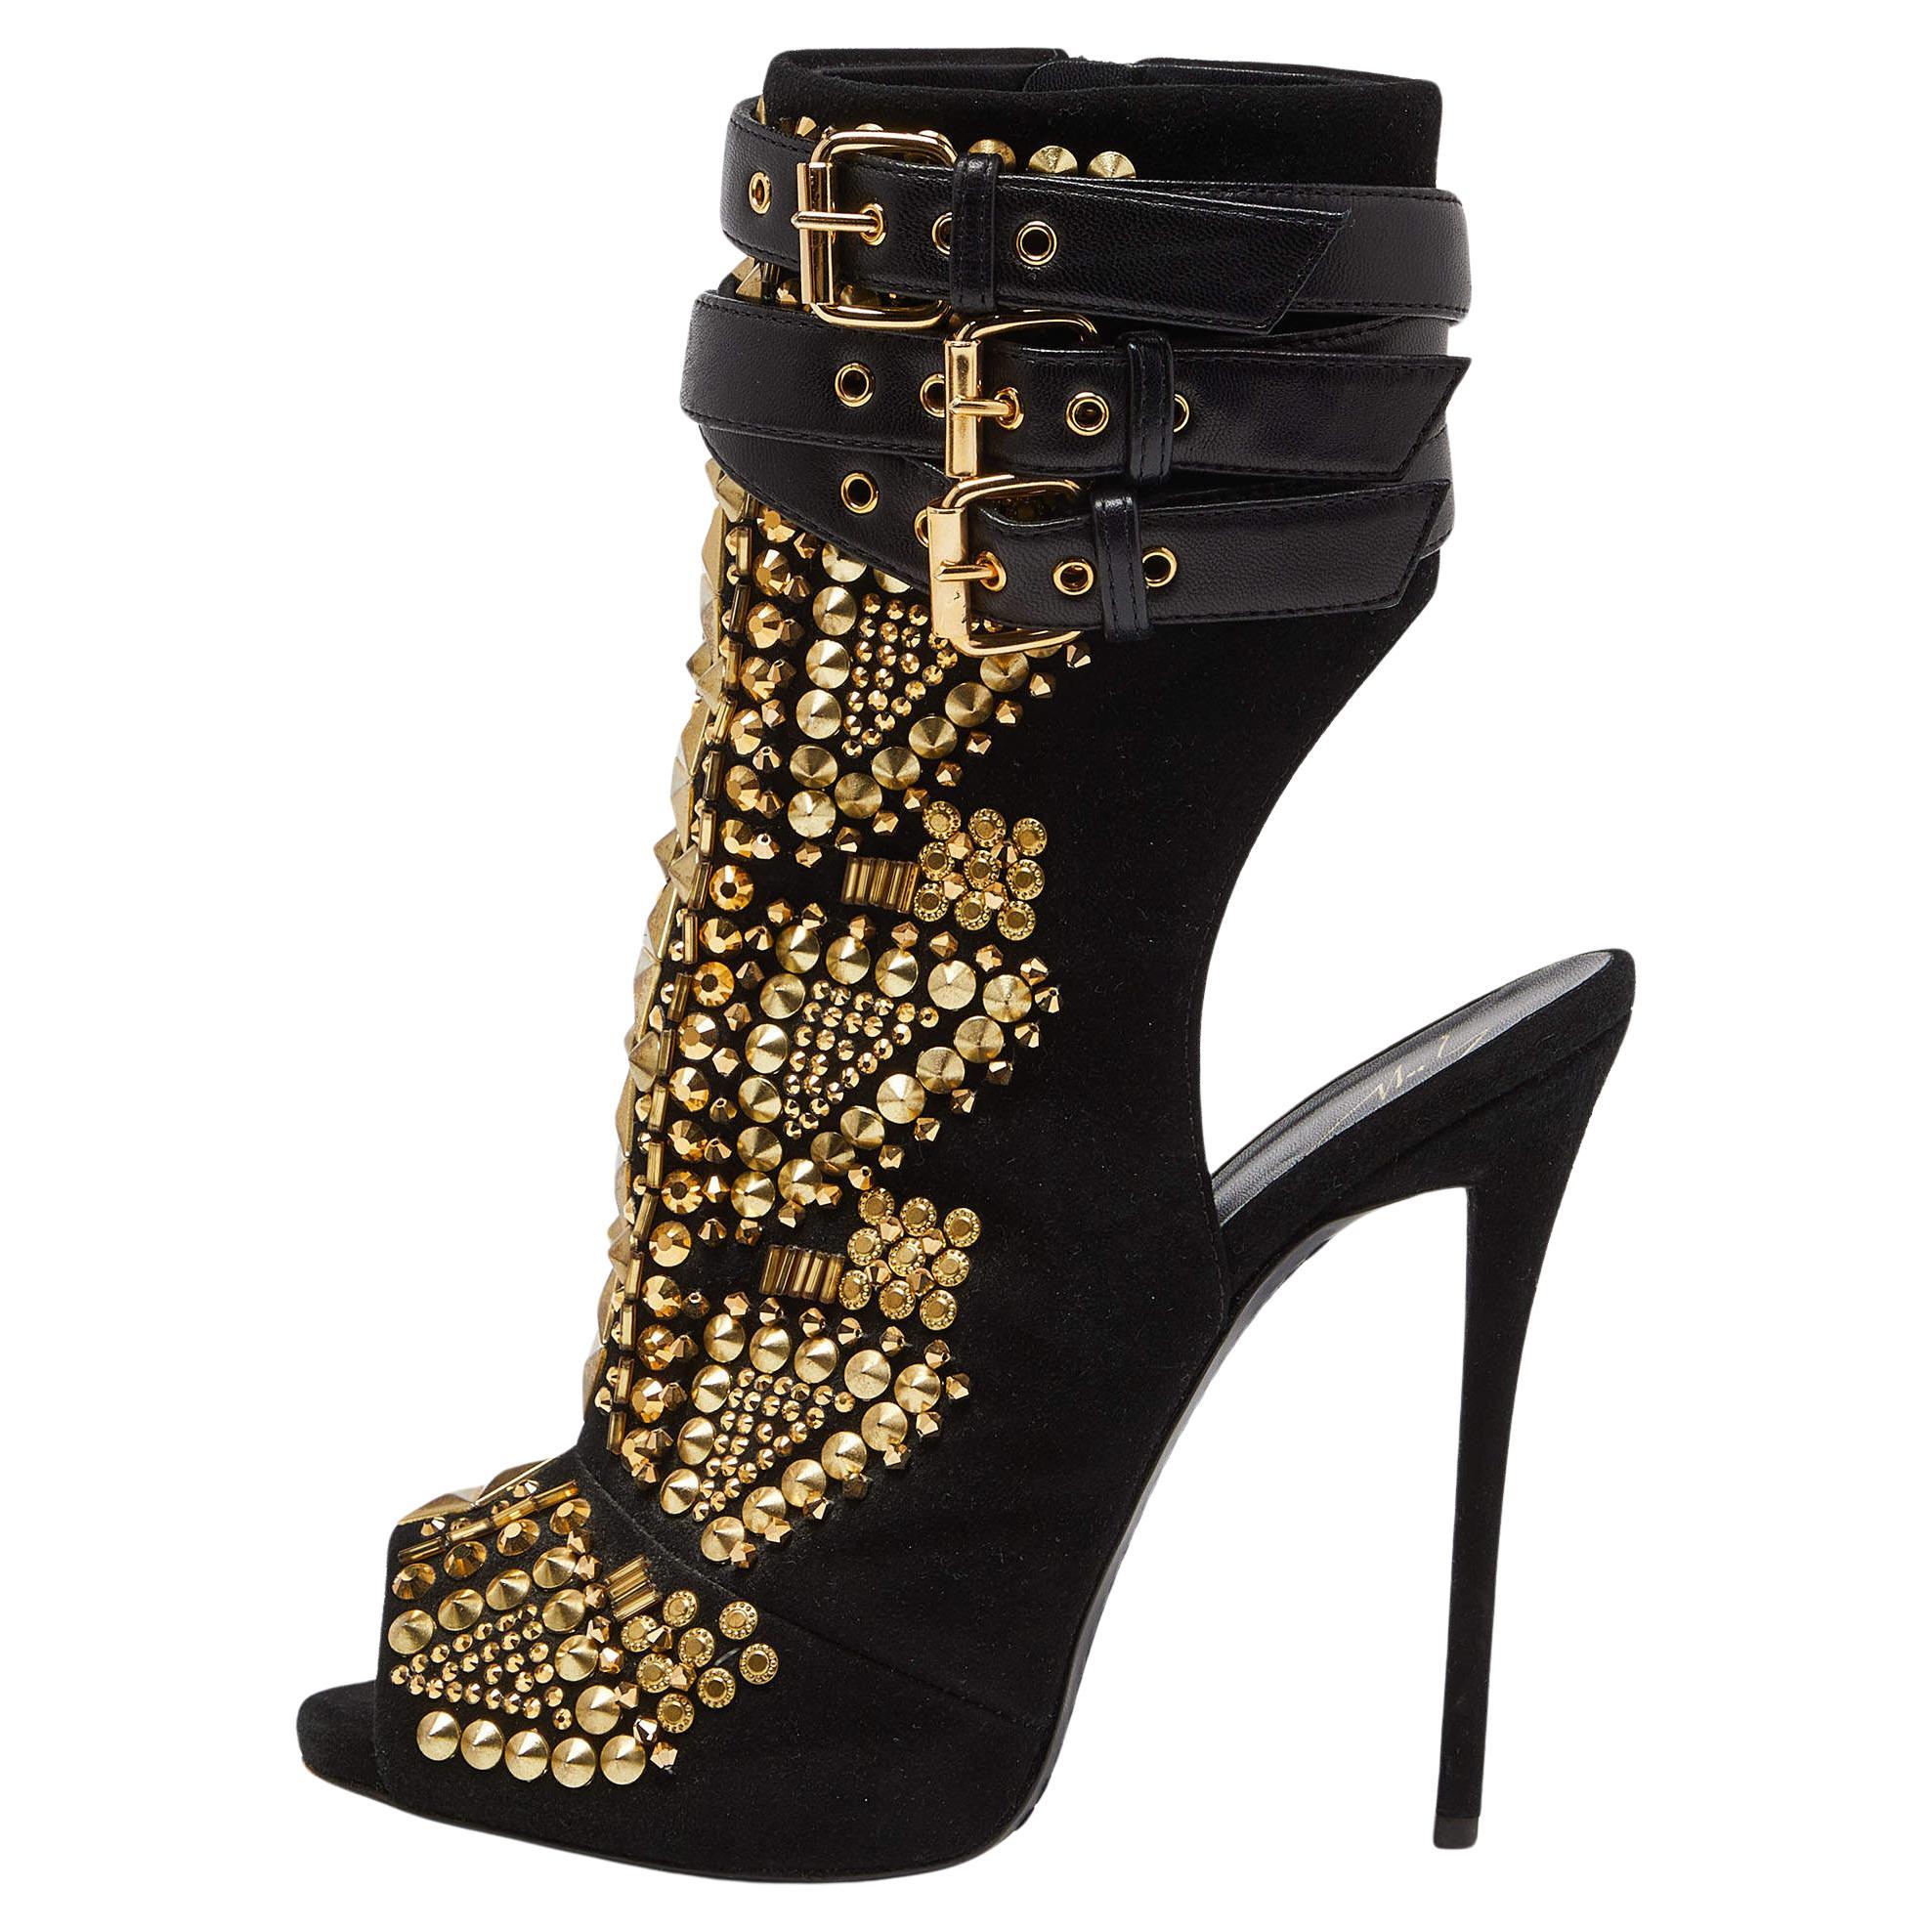 Giuseppe Zanotti Black Suede and Leather Studded Cutout Peep Toe Ankle Boots Siz For Sale